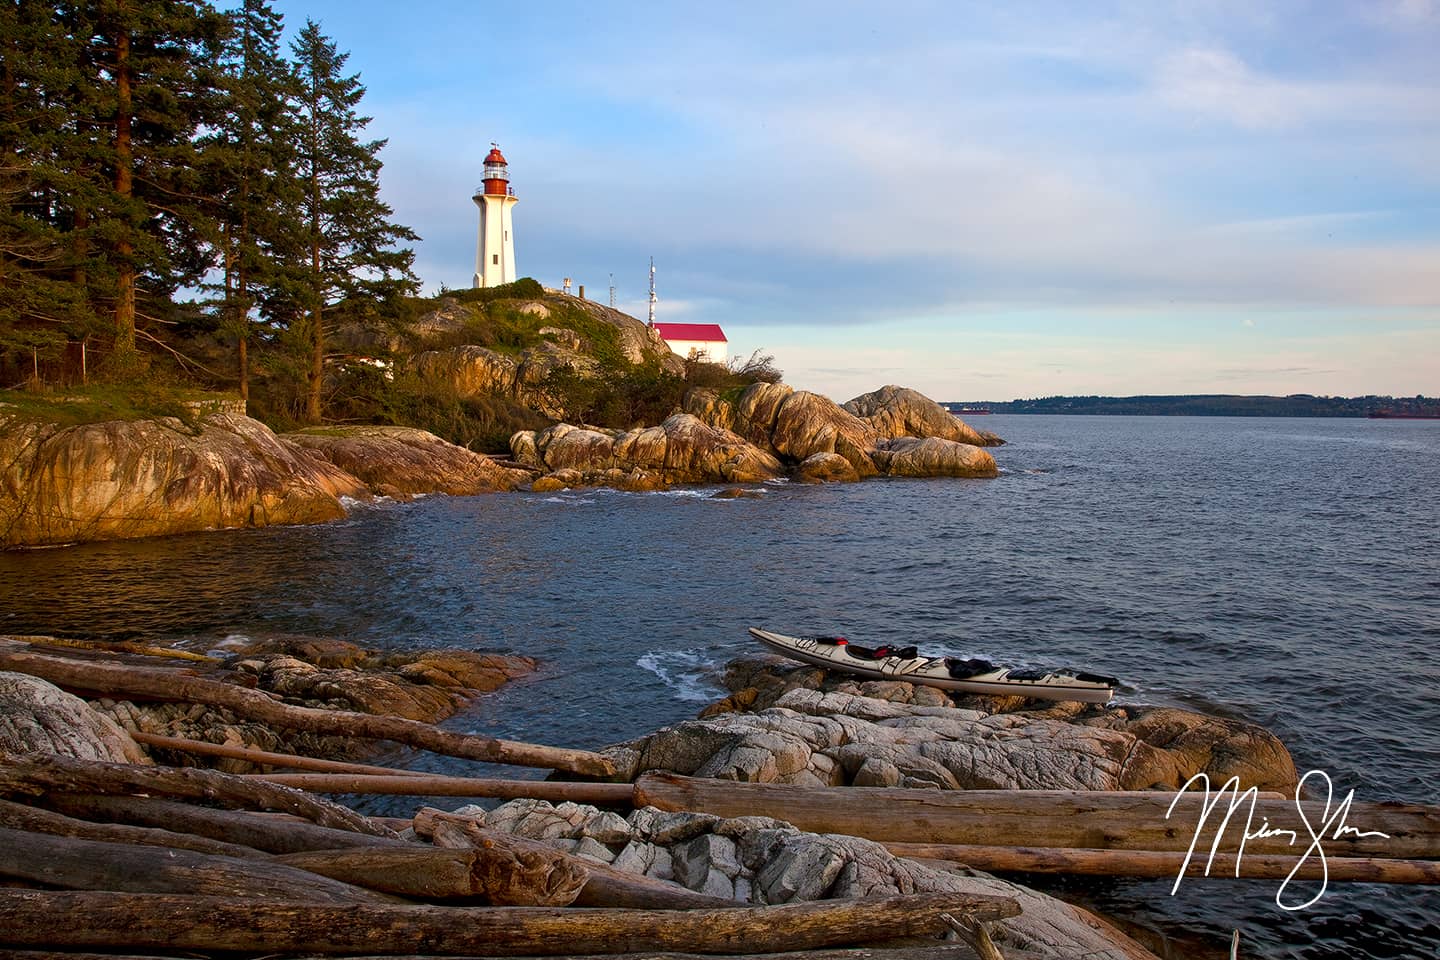 Open edition fine art print of Atkinson Lighthouse from Mickey Shannon Photography. Location: Atkinson Lighthouse, West Vancouver, British Columbia, Canada